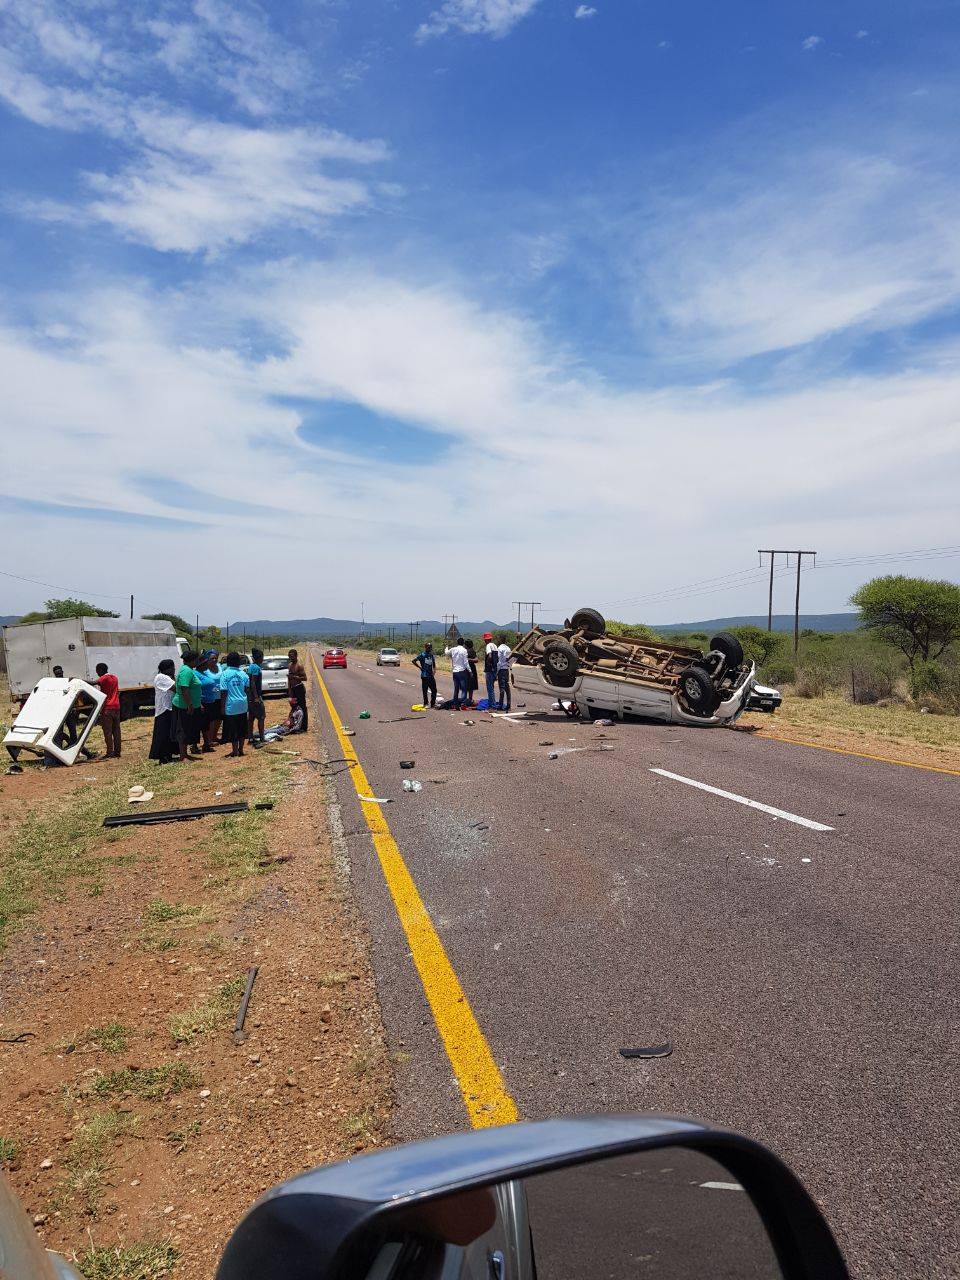 Three killed, 9 injured in bakkie rollover in the Waterberg district, Limpopo